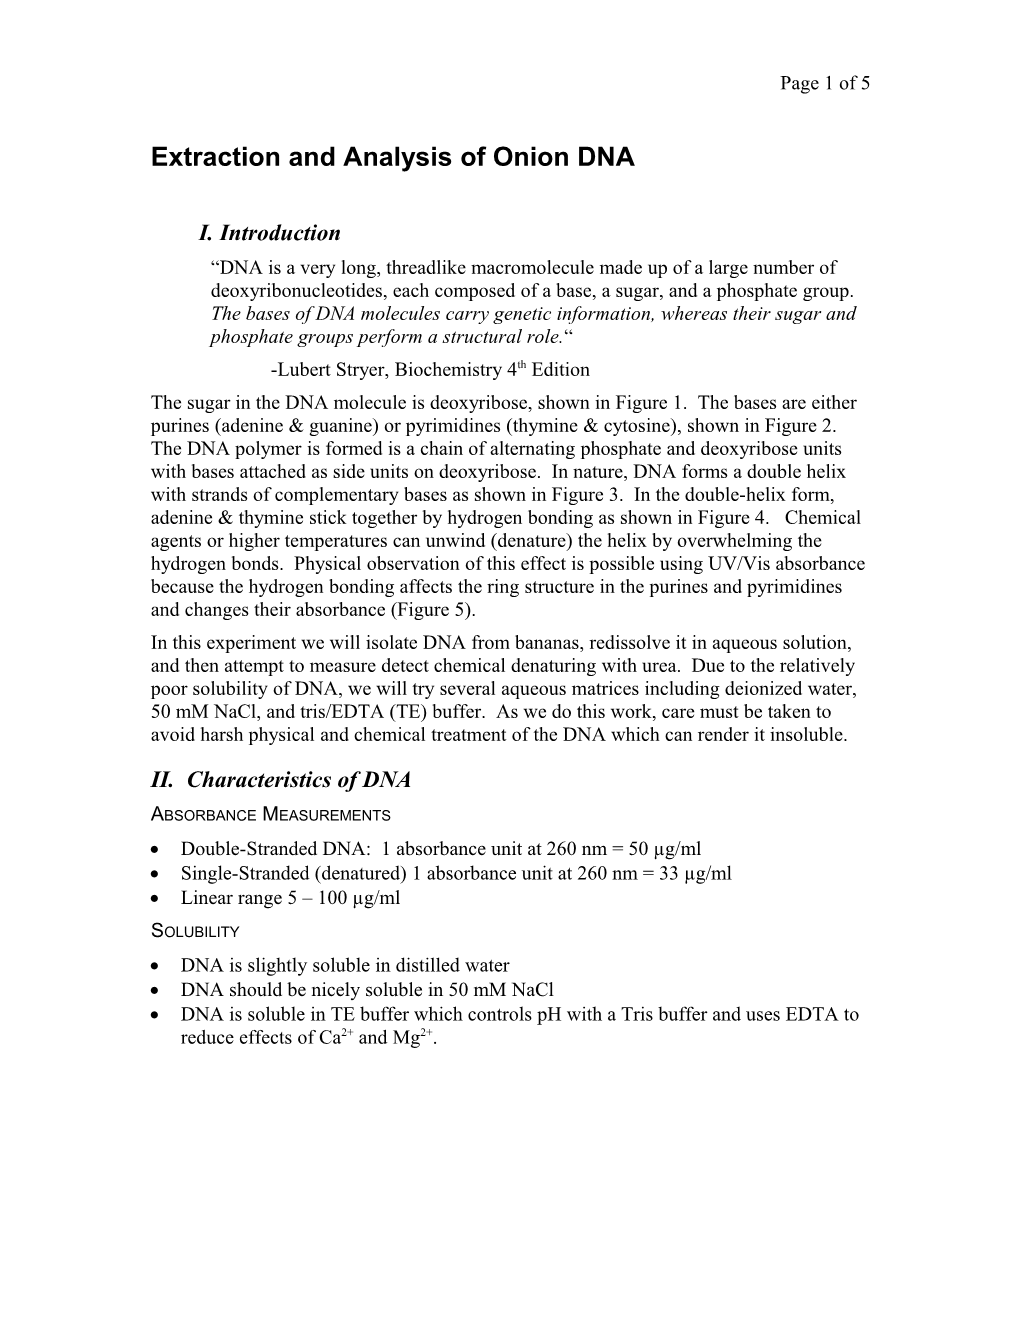 Extraction and Analysis of Onion DNA